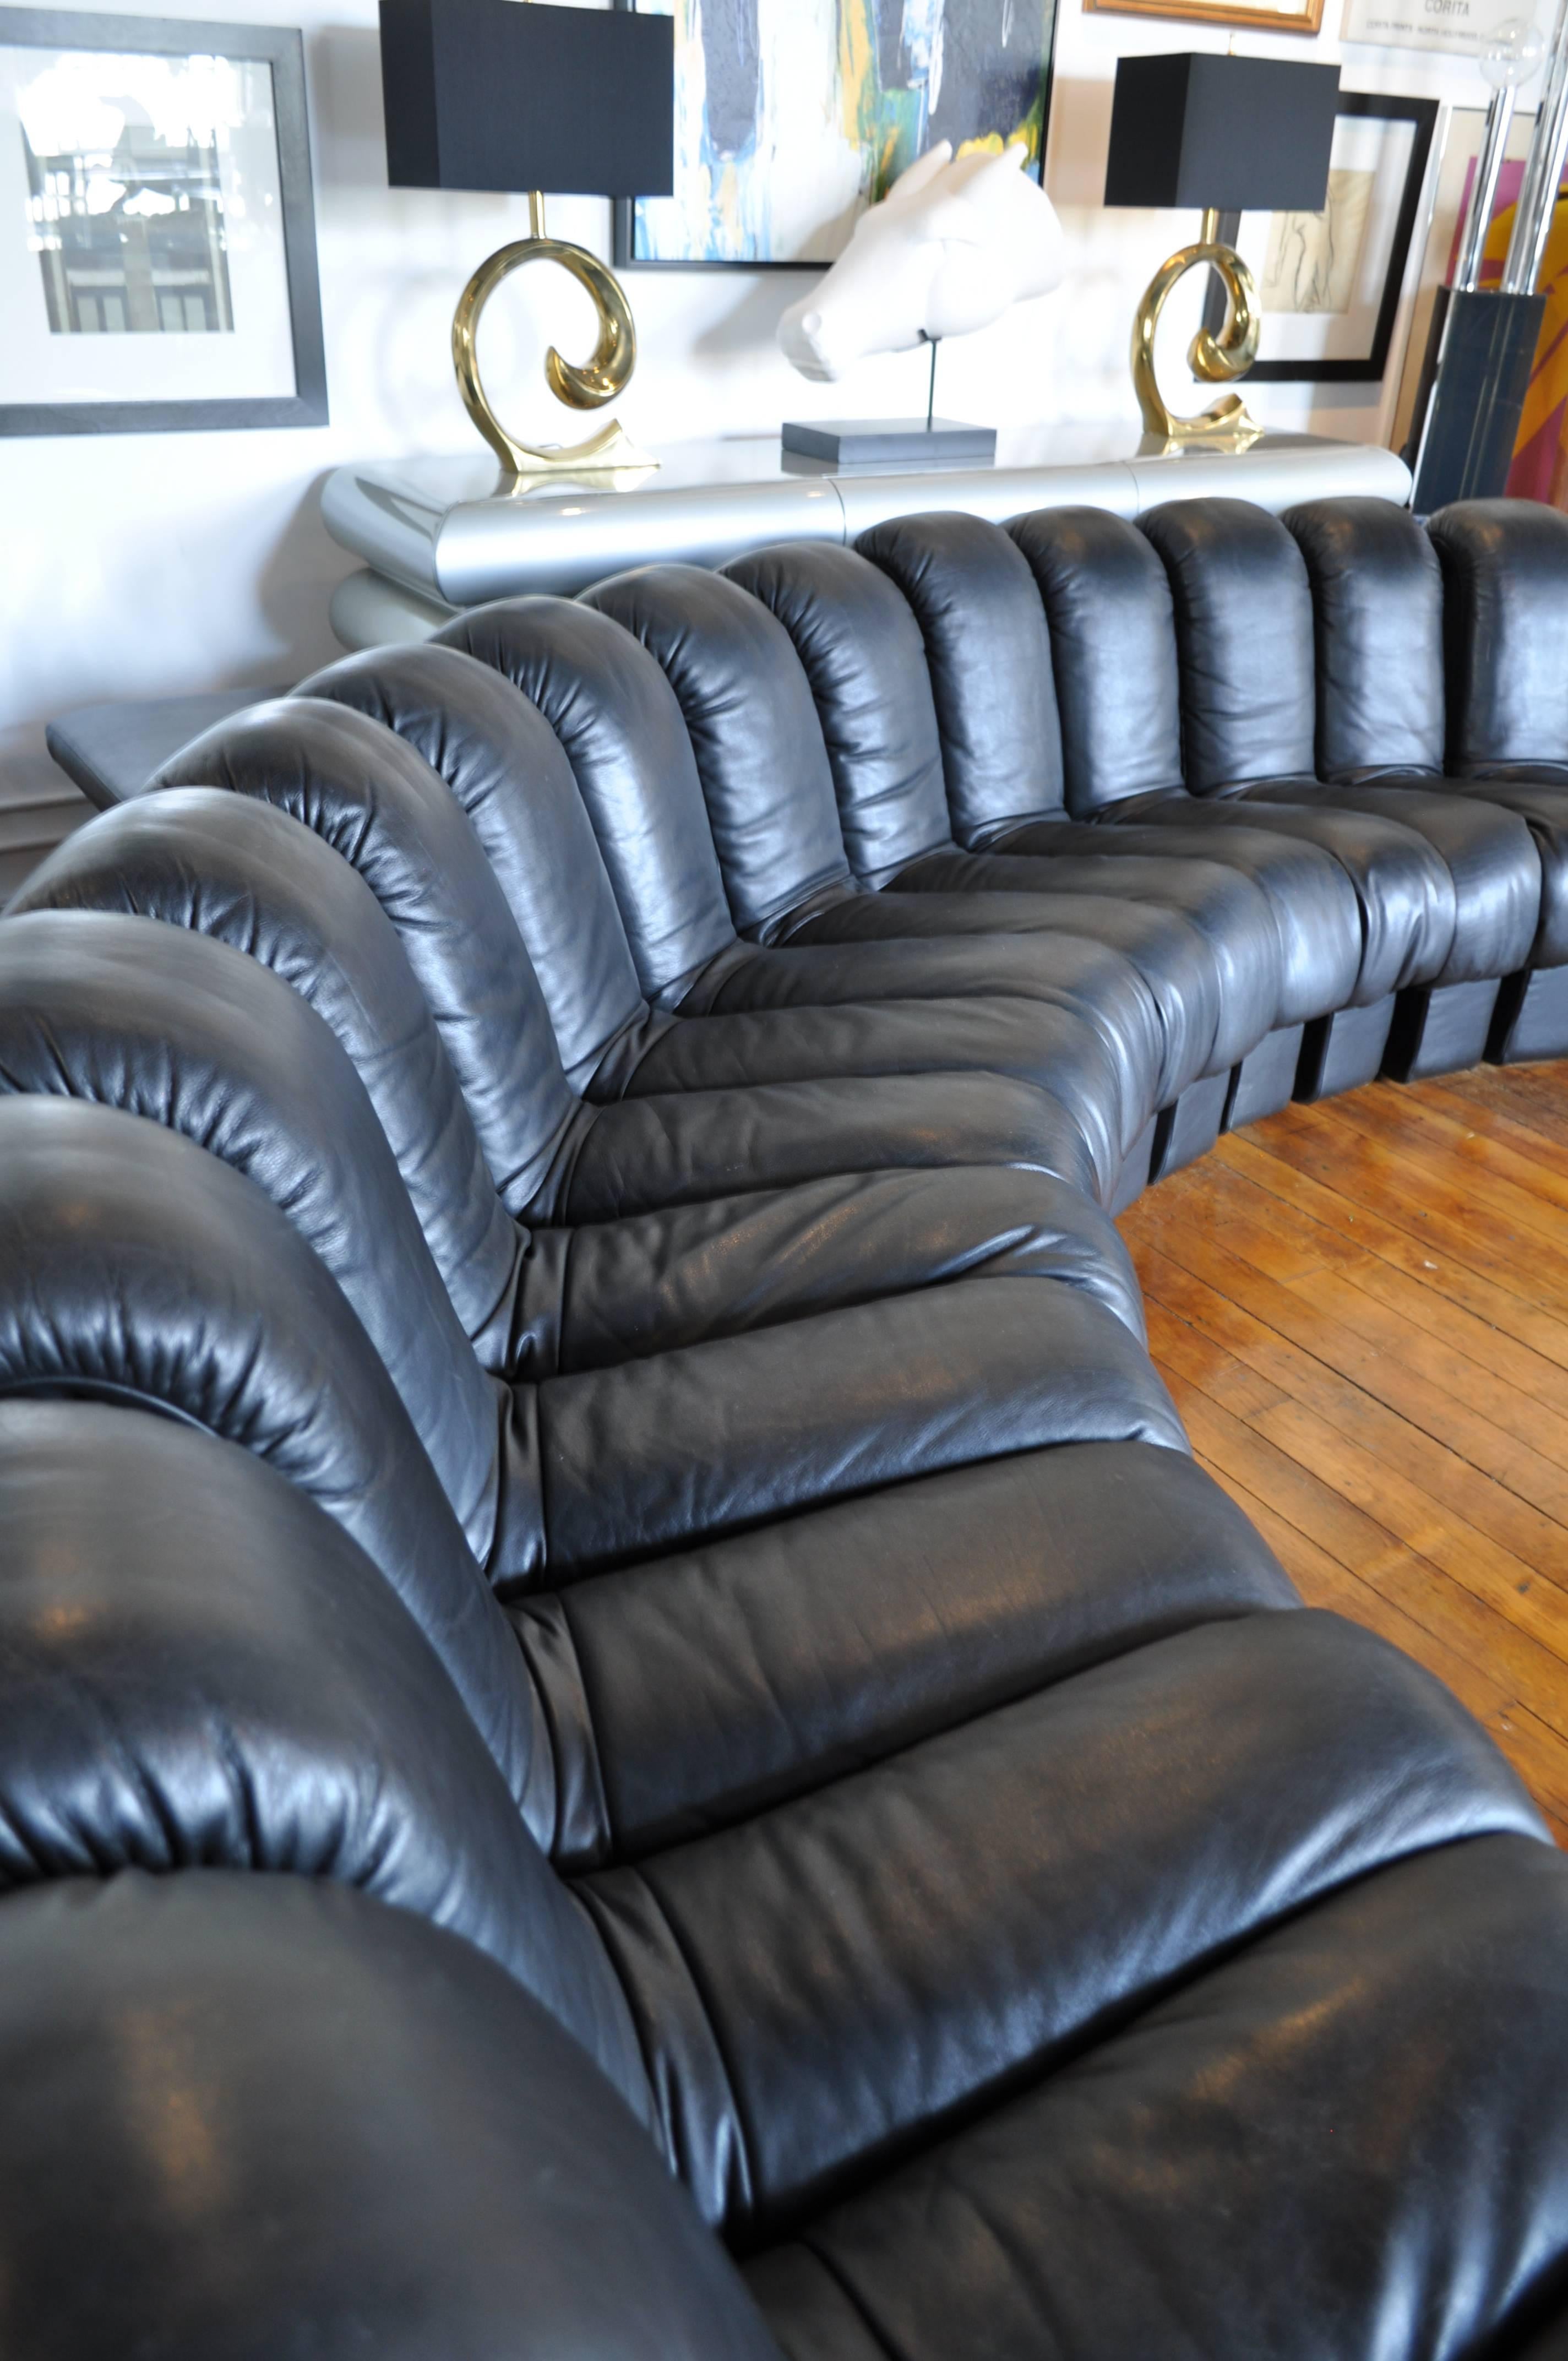 Stunning 20-piece 'Non-Stop' modular sofa designed by Ueli Bergere, Elenora Peduzzi-Riva and Heinz Ulrich. Manufactured by De Sede, Switzerland.

Each section and all sides are fully upholstered in original black leather. Sections connect with a